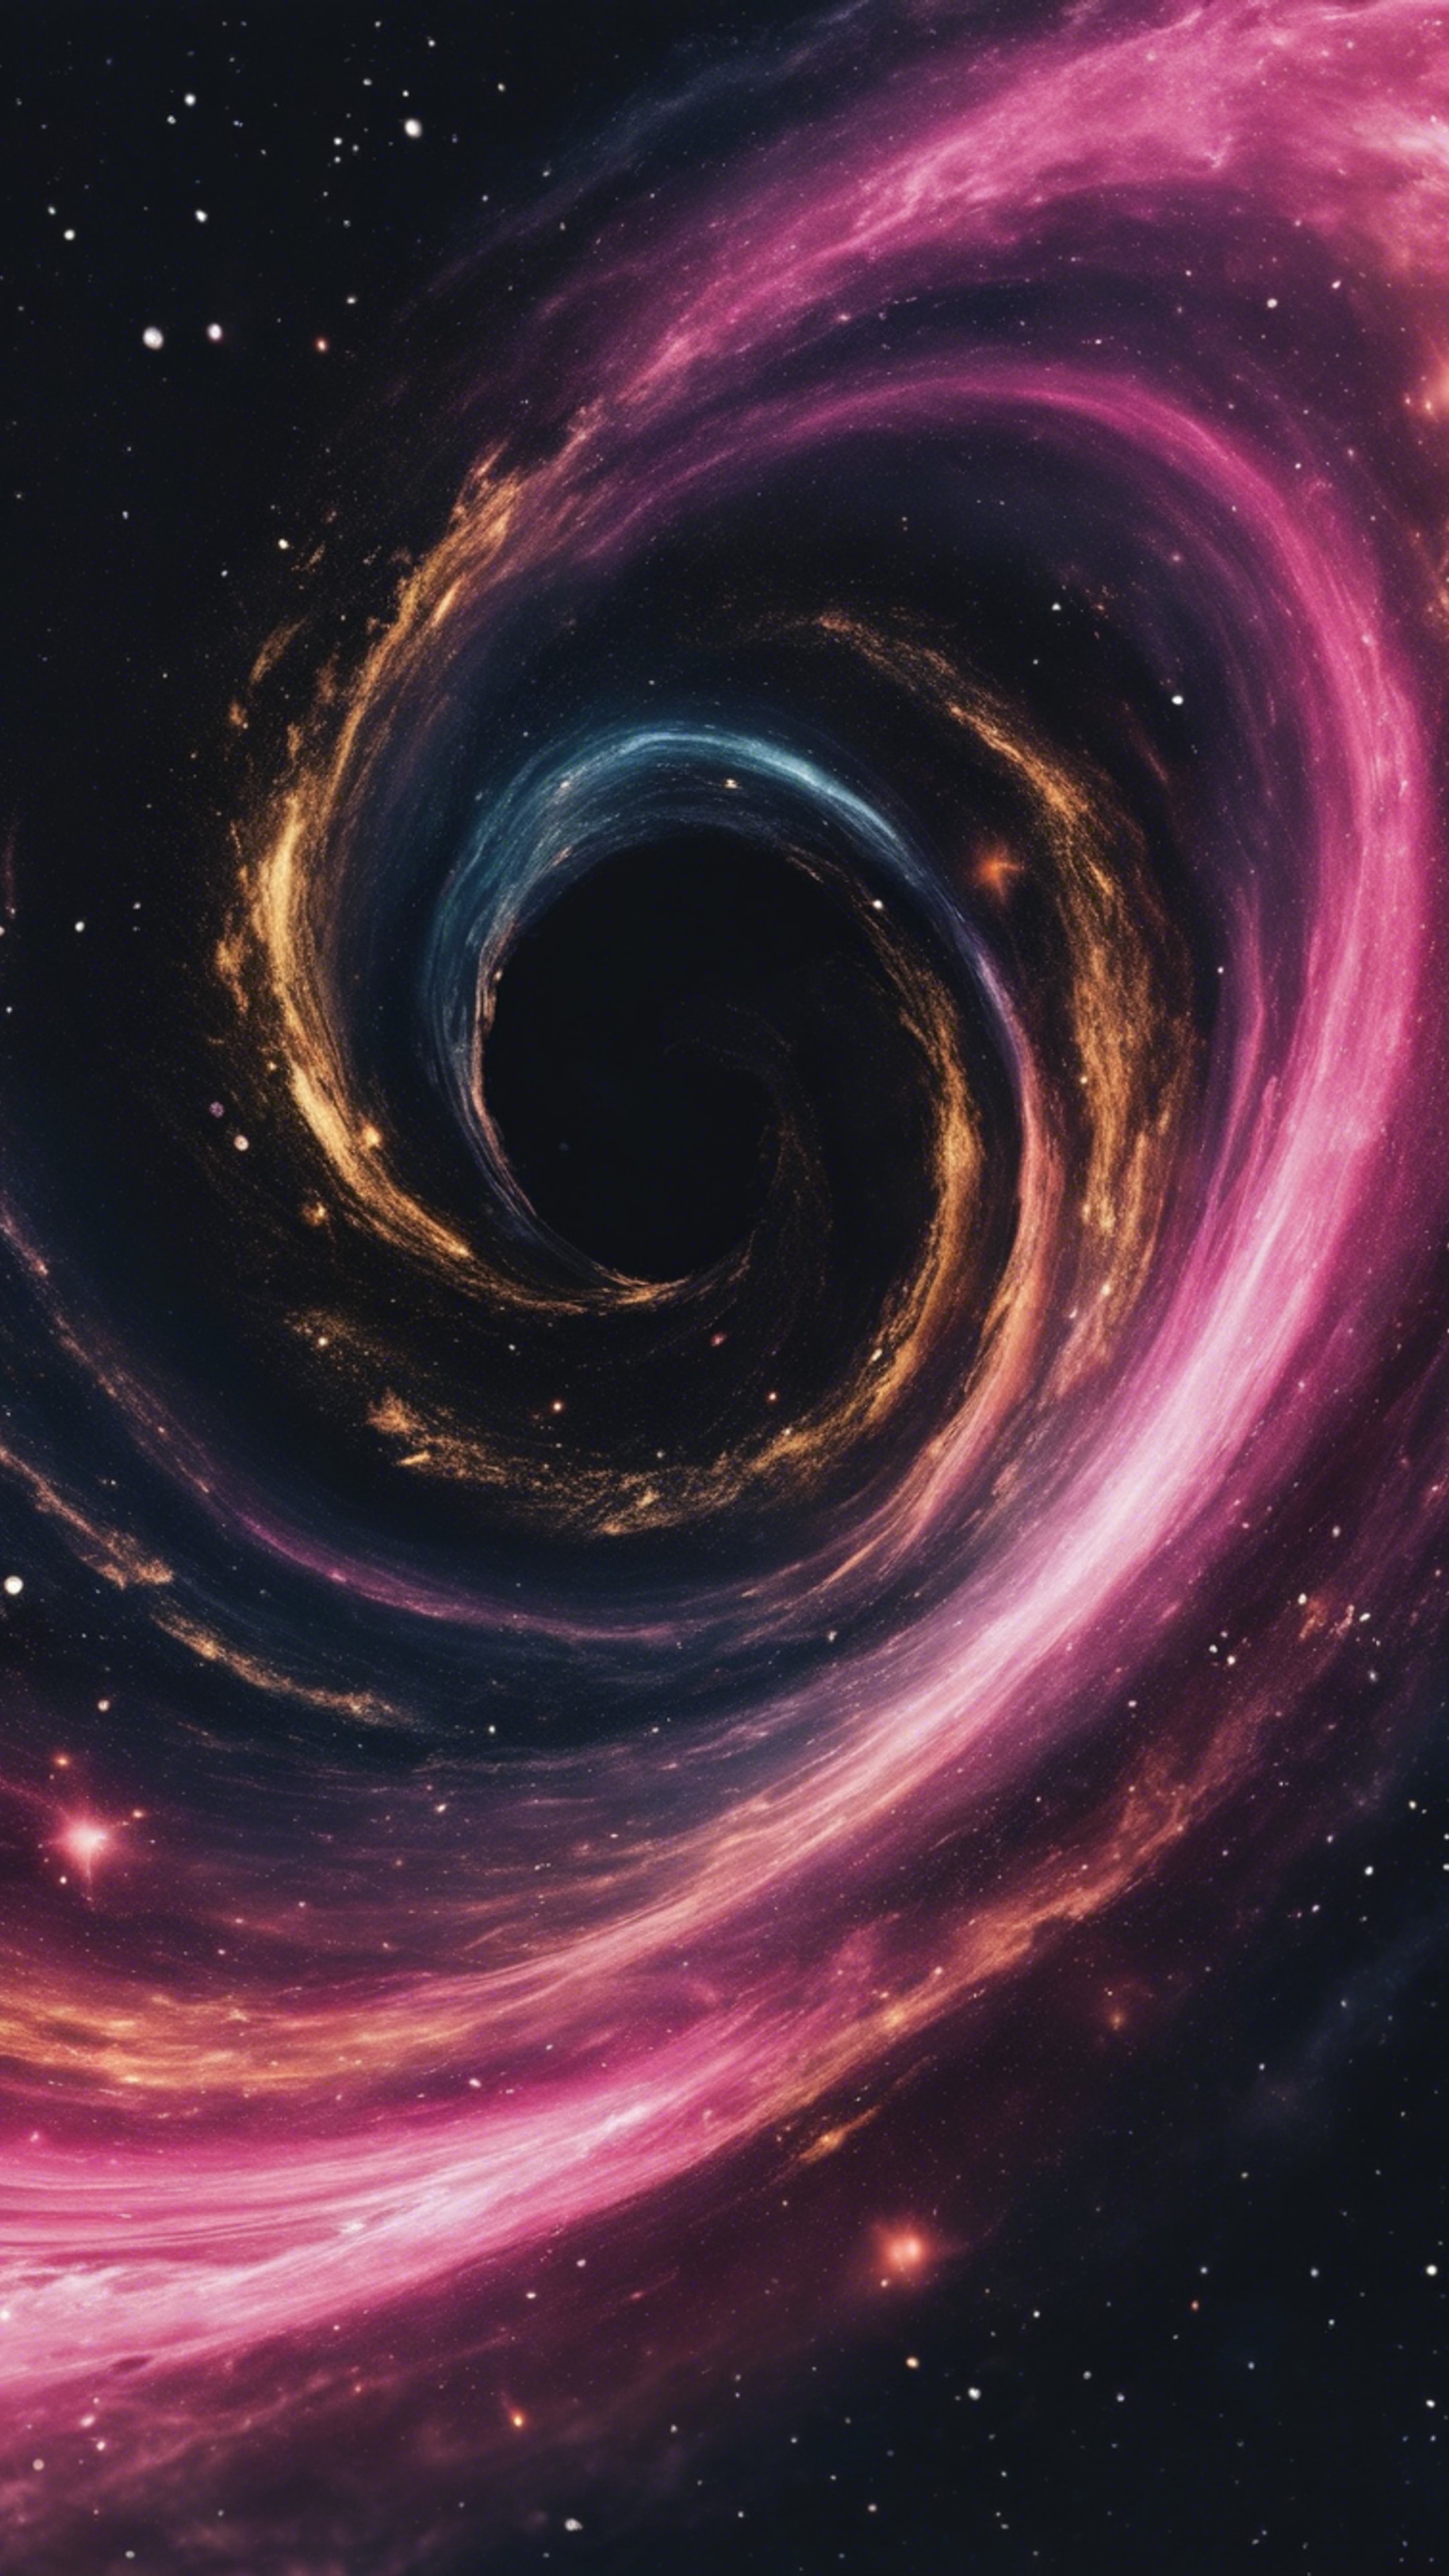 A swirling Galaxy with hues of pink and gold amongst the dark void of space. Tapet[38386911806f452c9333]